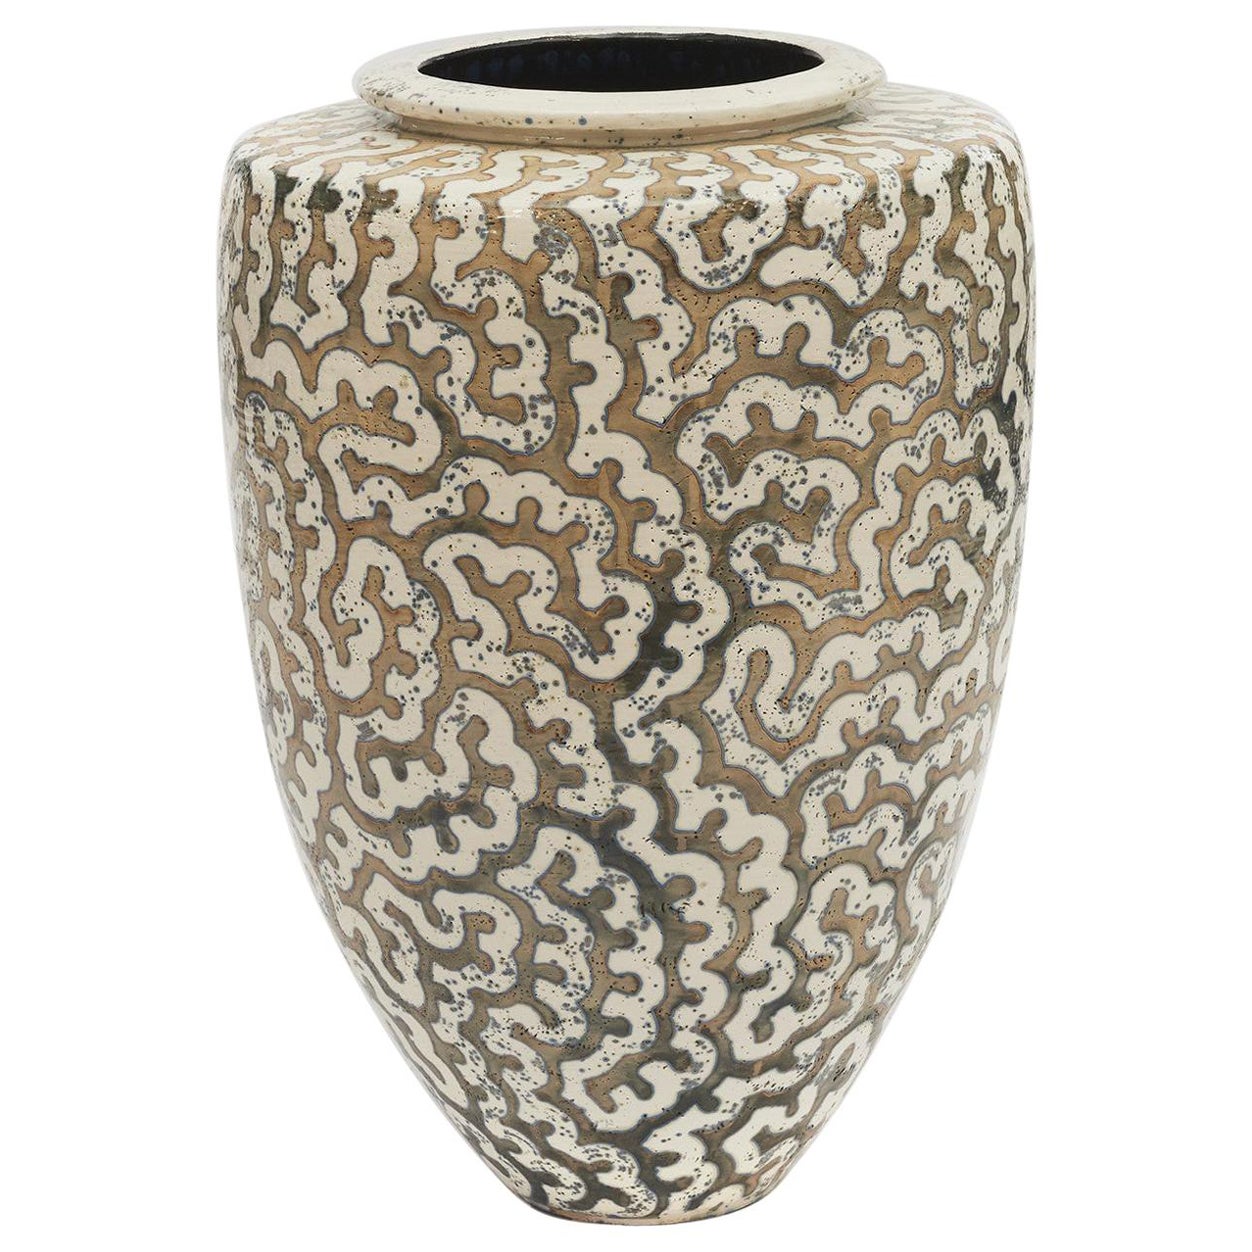 Per Weiss Colossal Stoneware Floor Vase For Sale